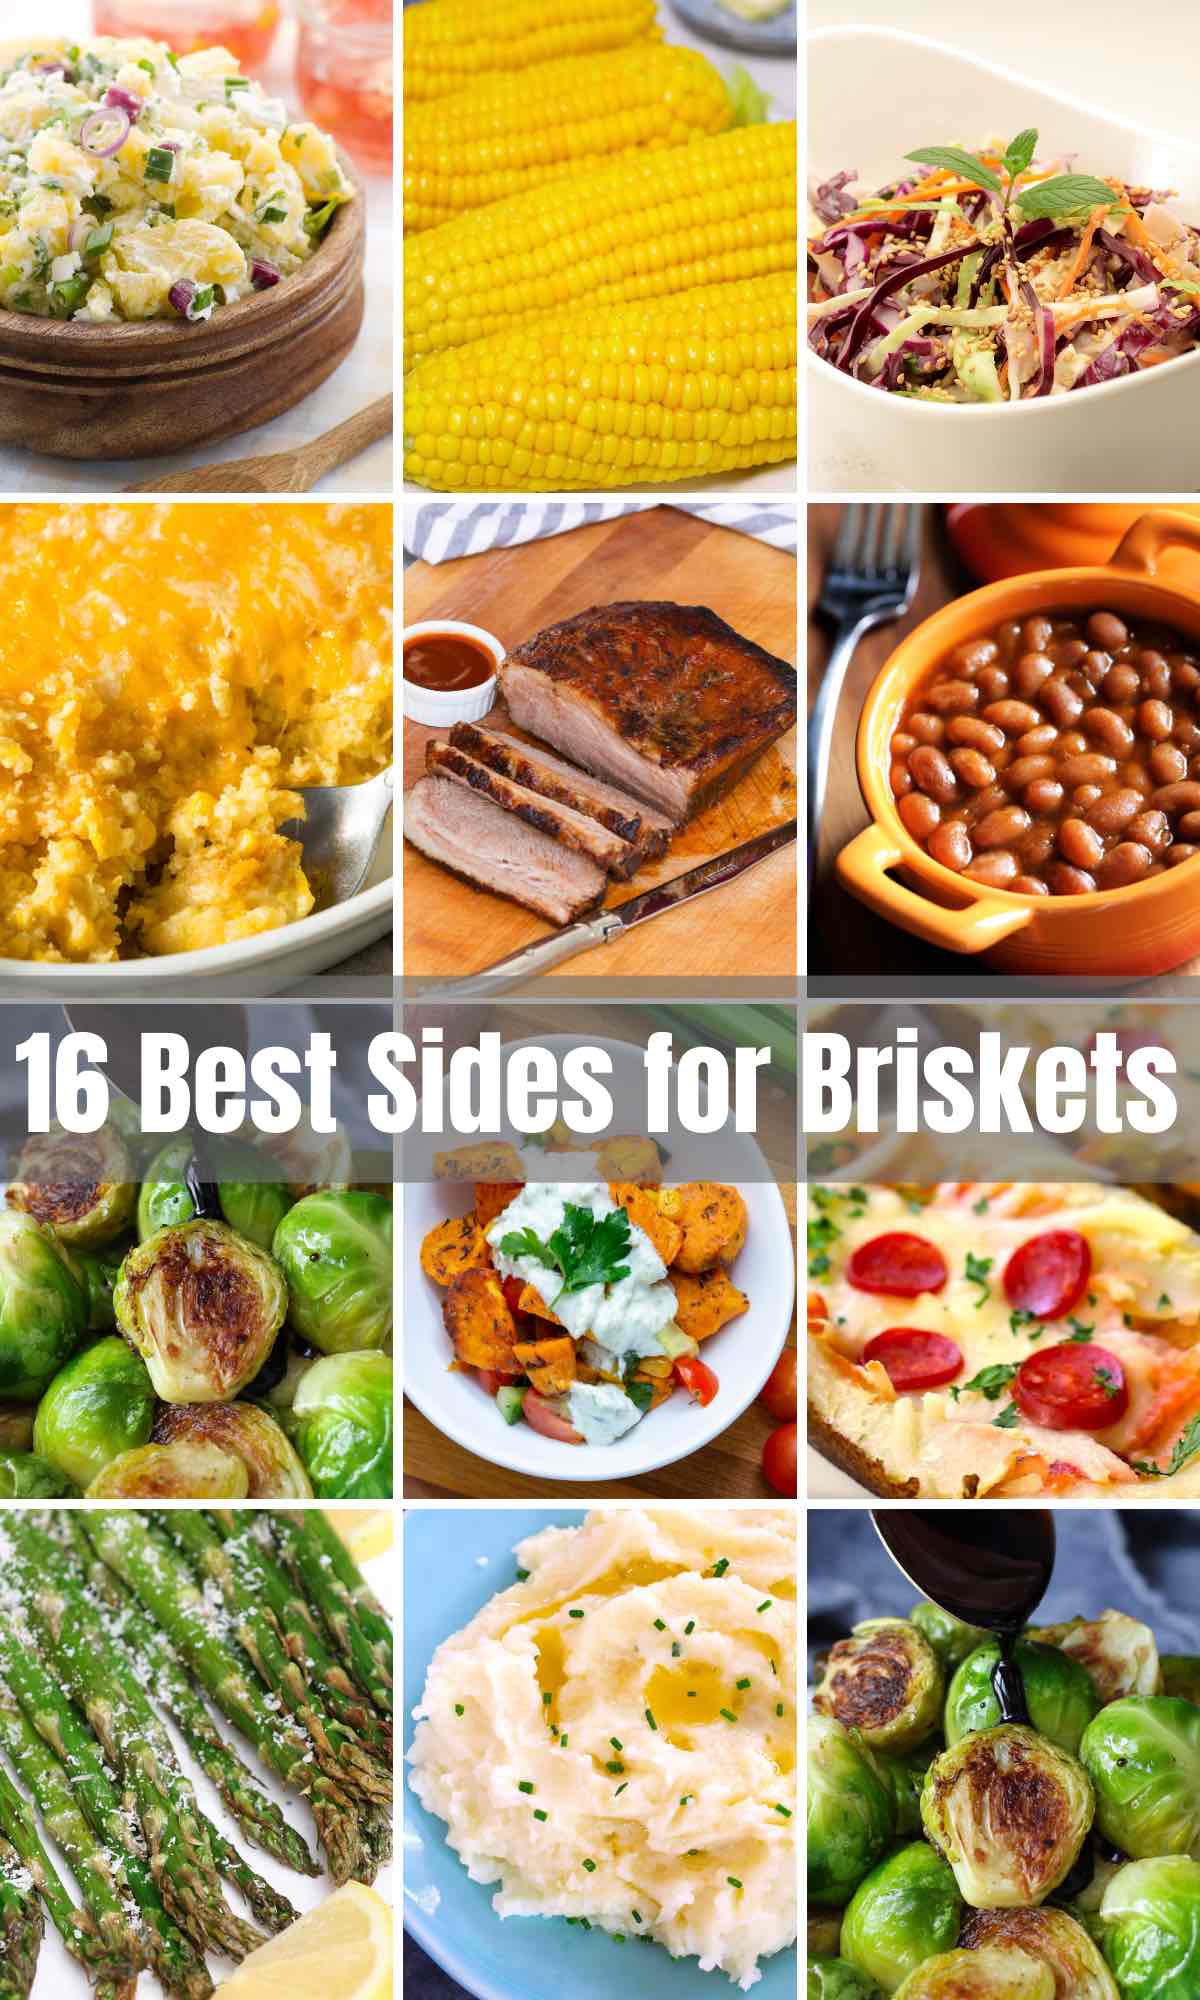 What To Serve With Brisket (27 Best Side Dishes)